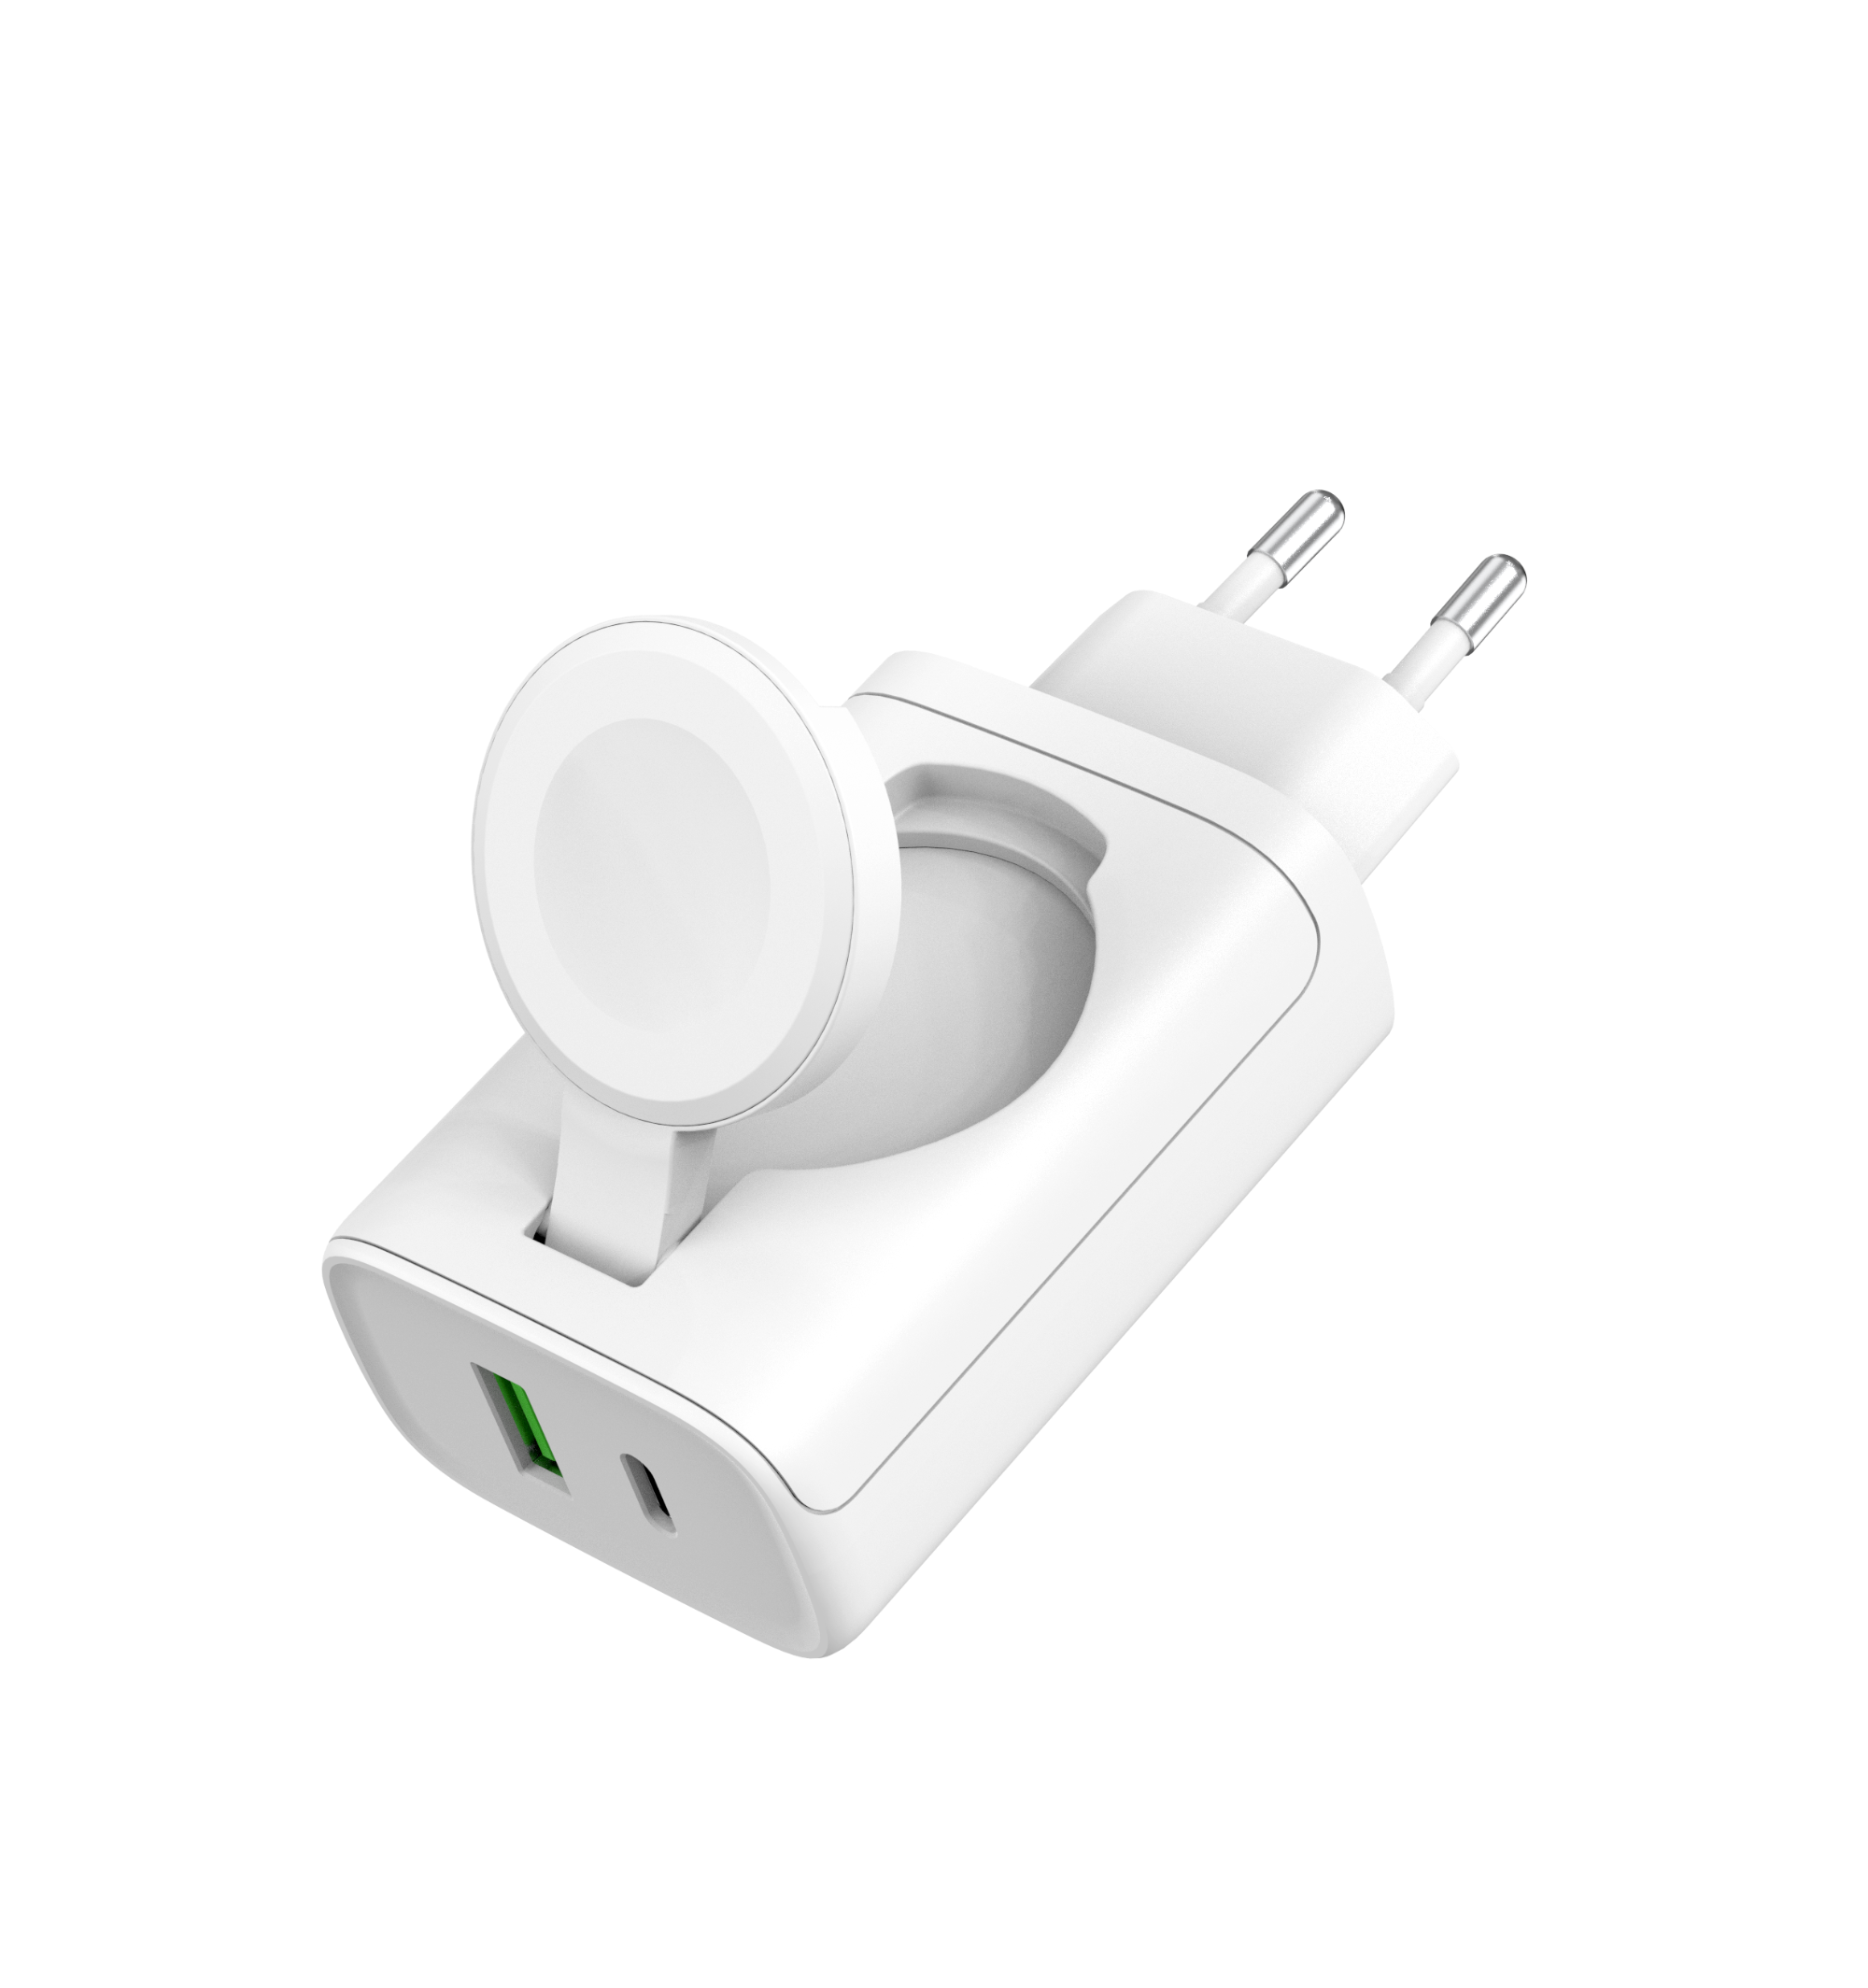 ZONSAN  Introduces Groundbreaking USB Wall Charger with Universal Wireless Magnetic Function